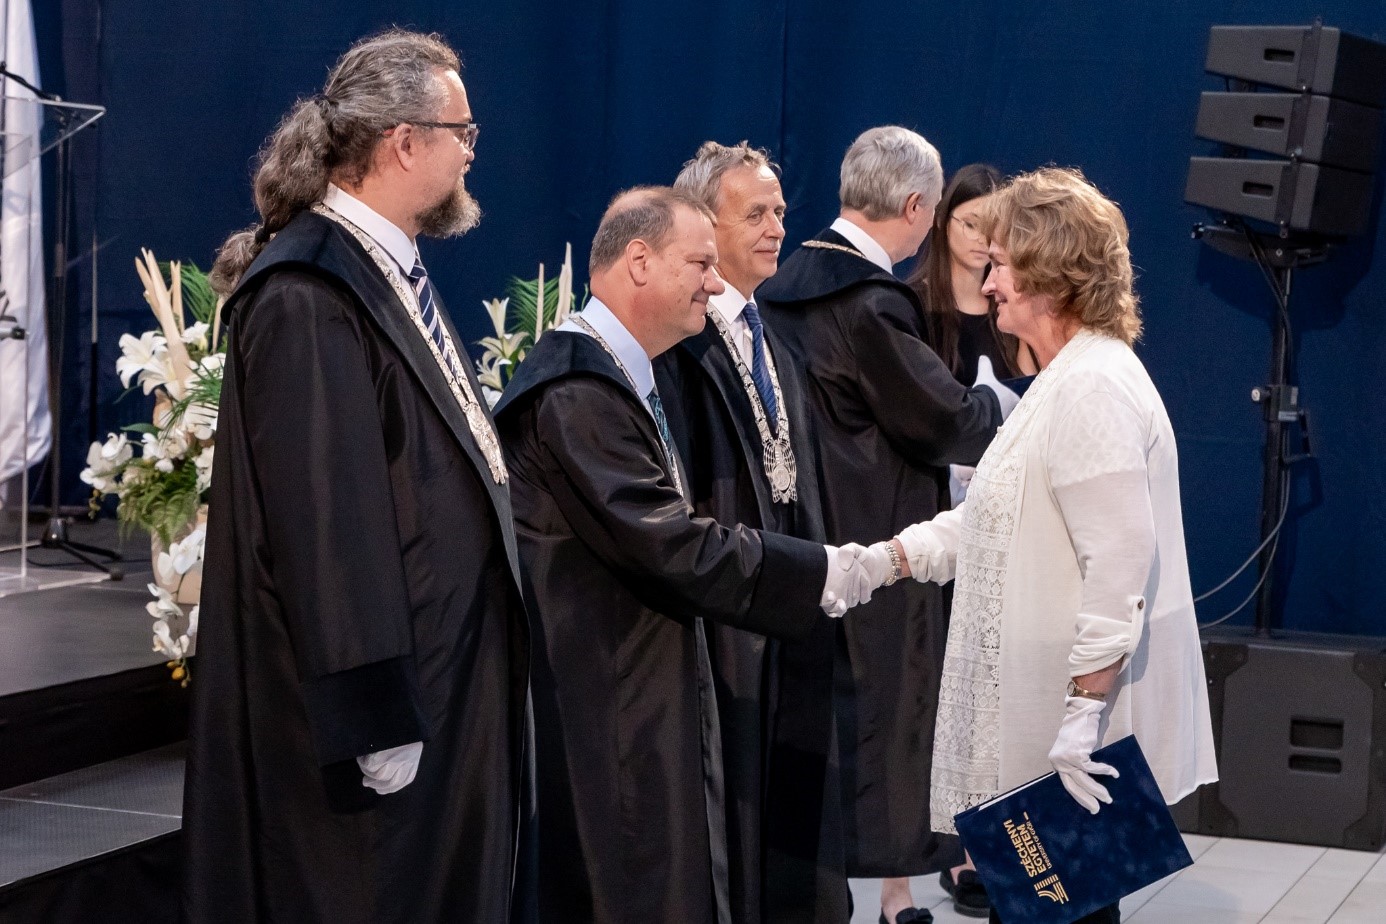 Gallery of the gold diploma ceremony